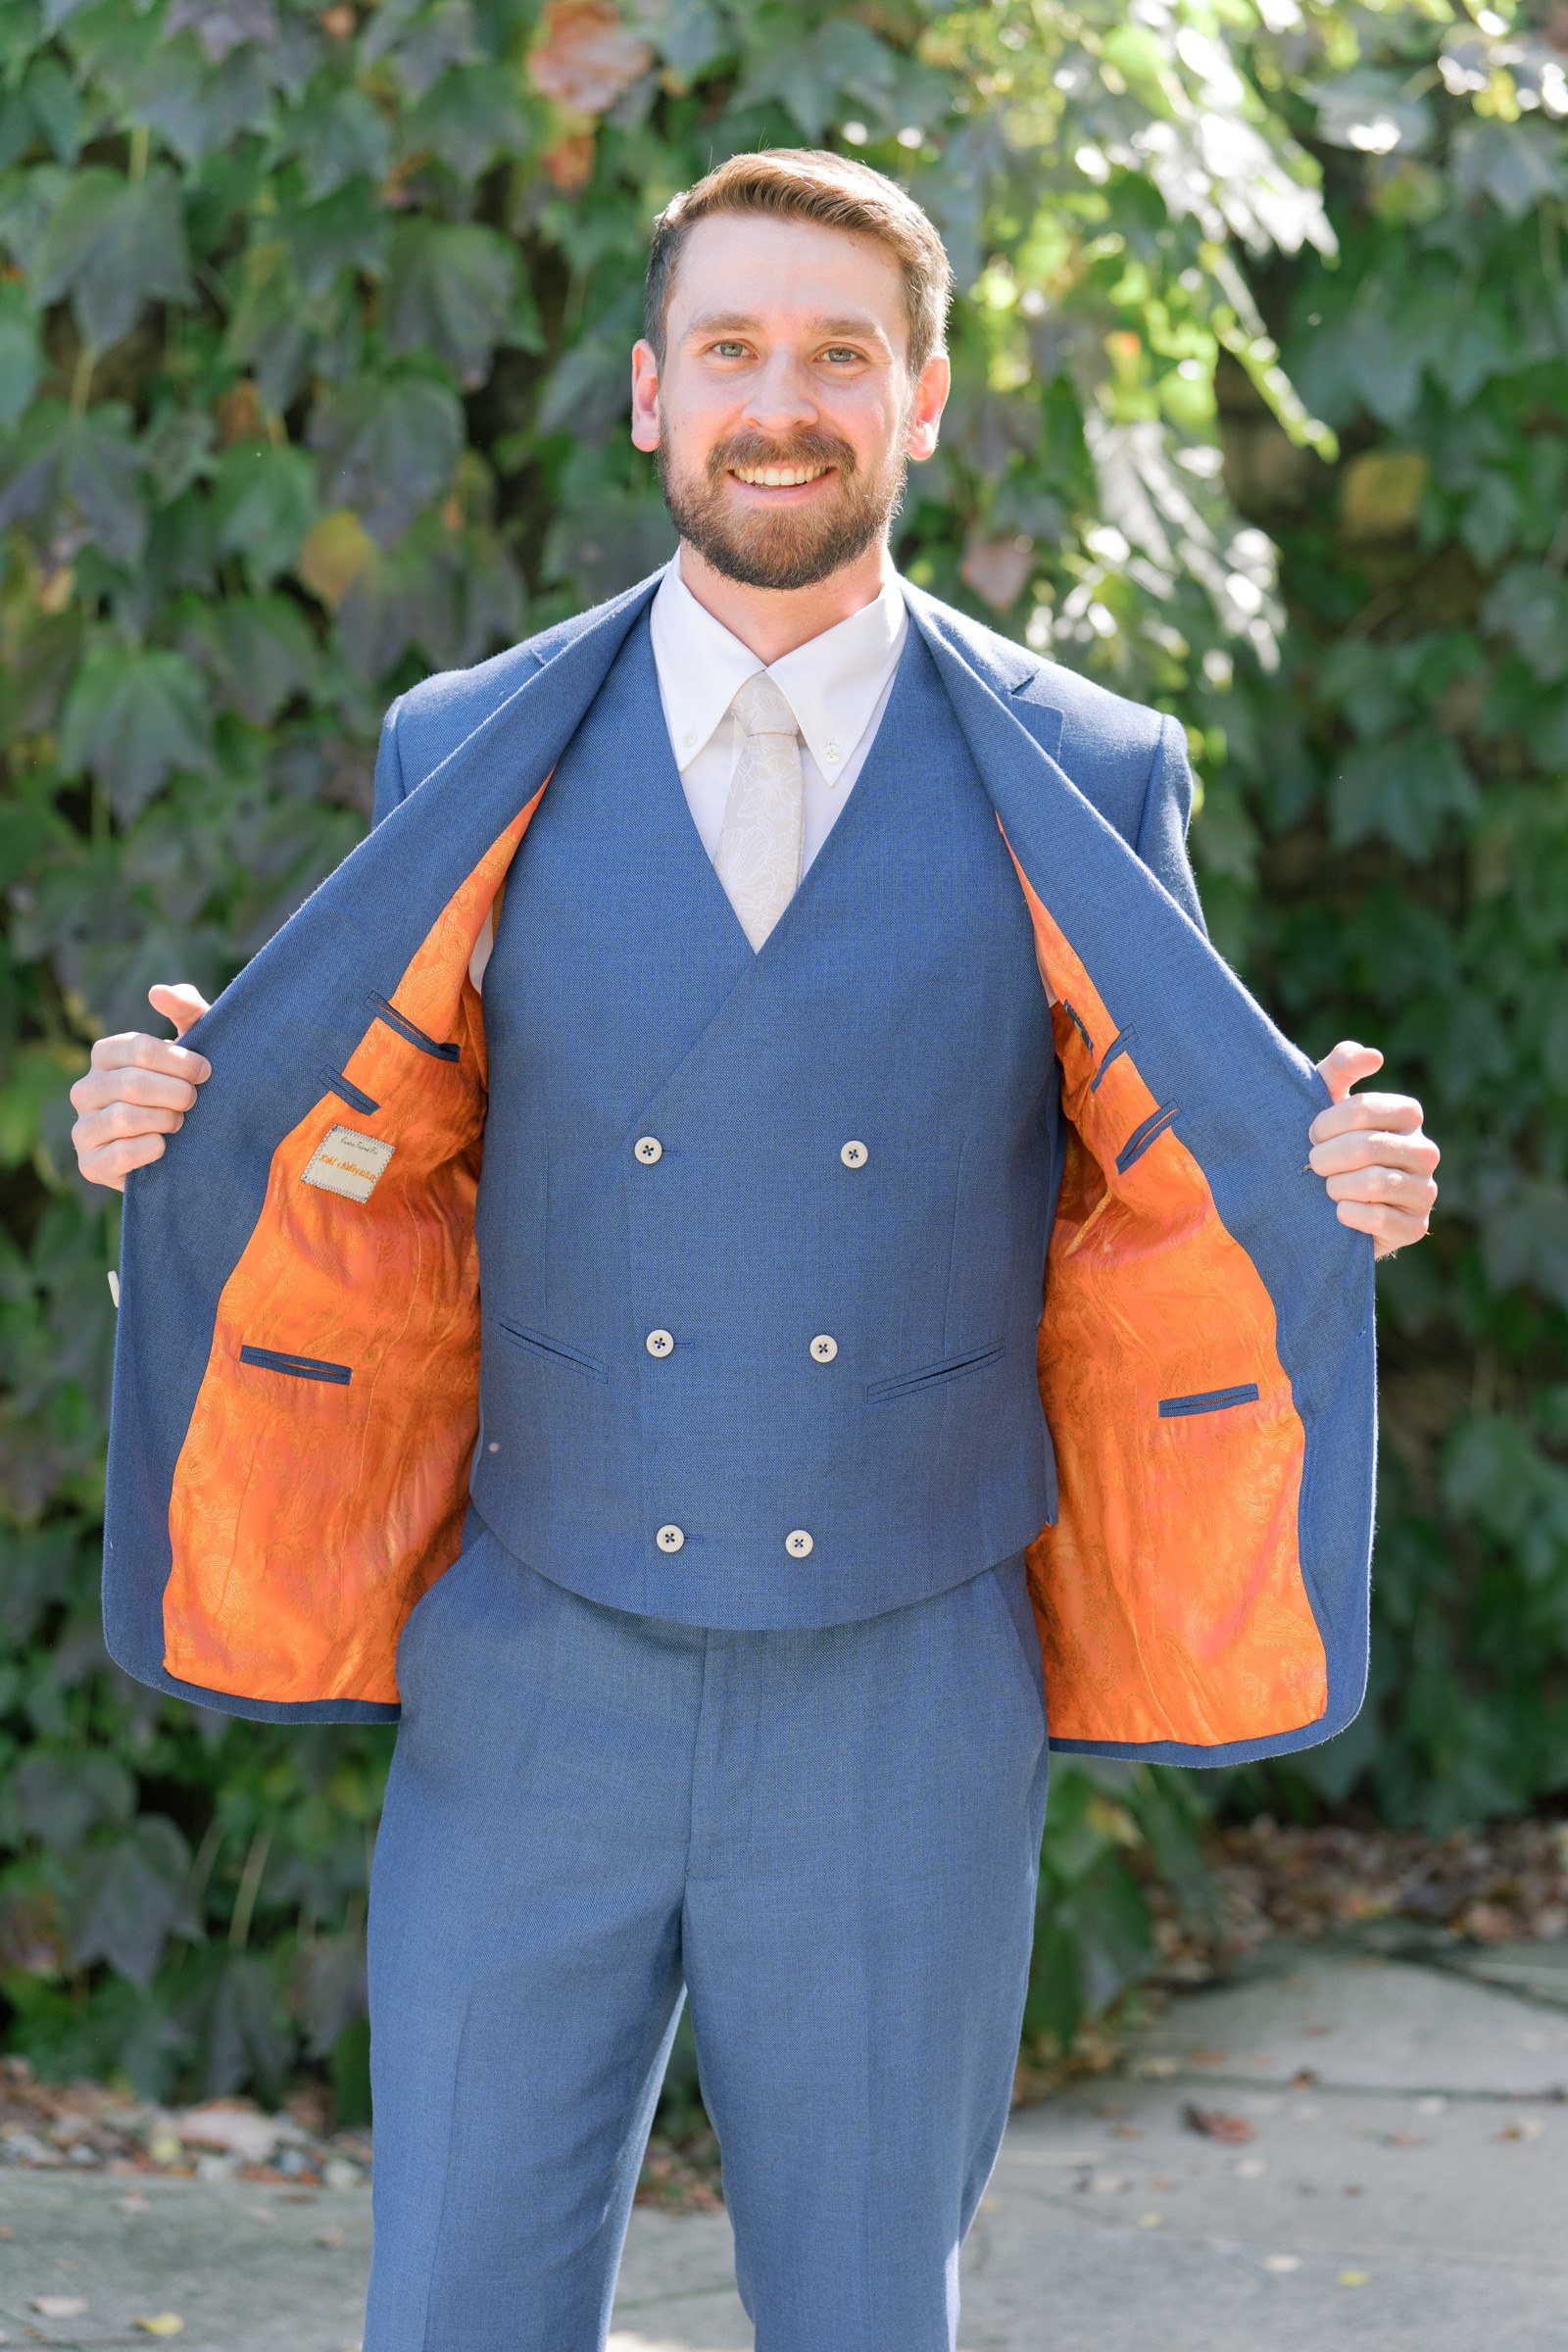 Kohl Tabener holds his suit jacket open to show the orange fabric inside